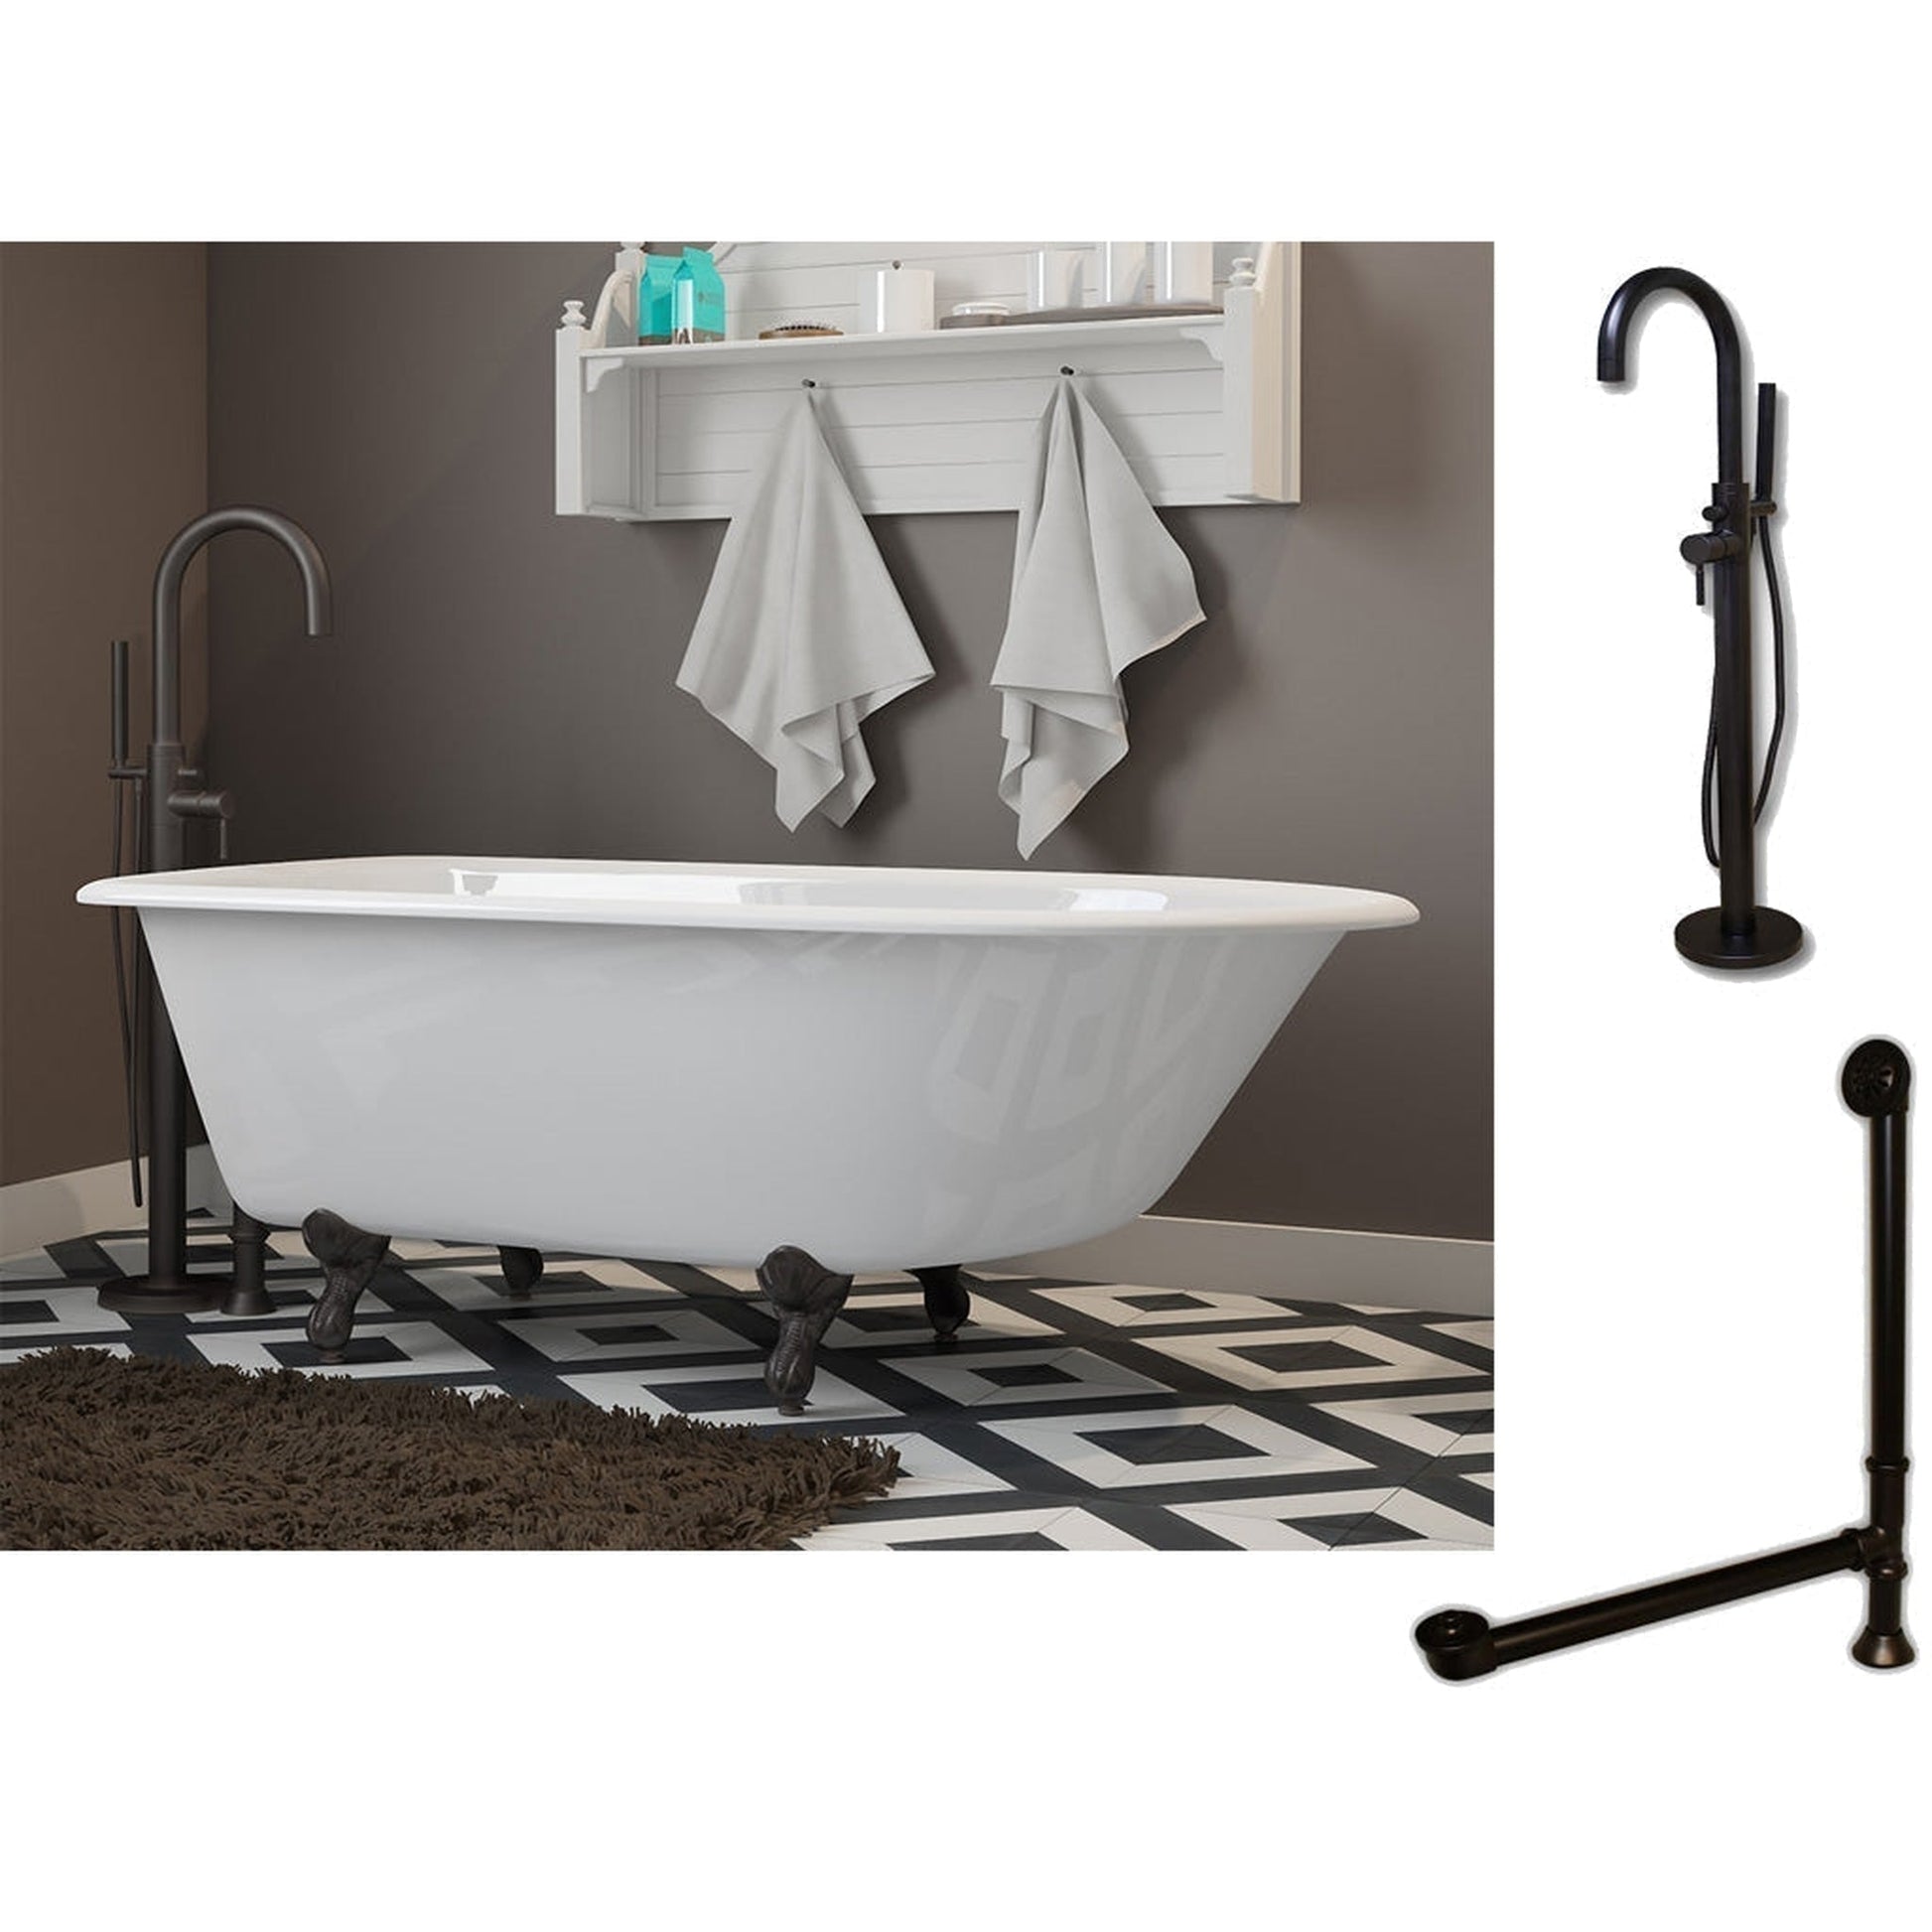 Cambridge Plumbing 54" White Cast Iron Rolled Rim Clawfoot Bathtub With No Deck Holes And Complete Plumbing Package Including Modern Floor Mounted Faucet, Drain And Overflow Assembly In Oil Rubbed Bronze